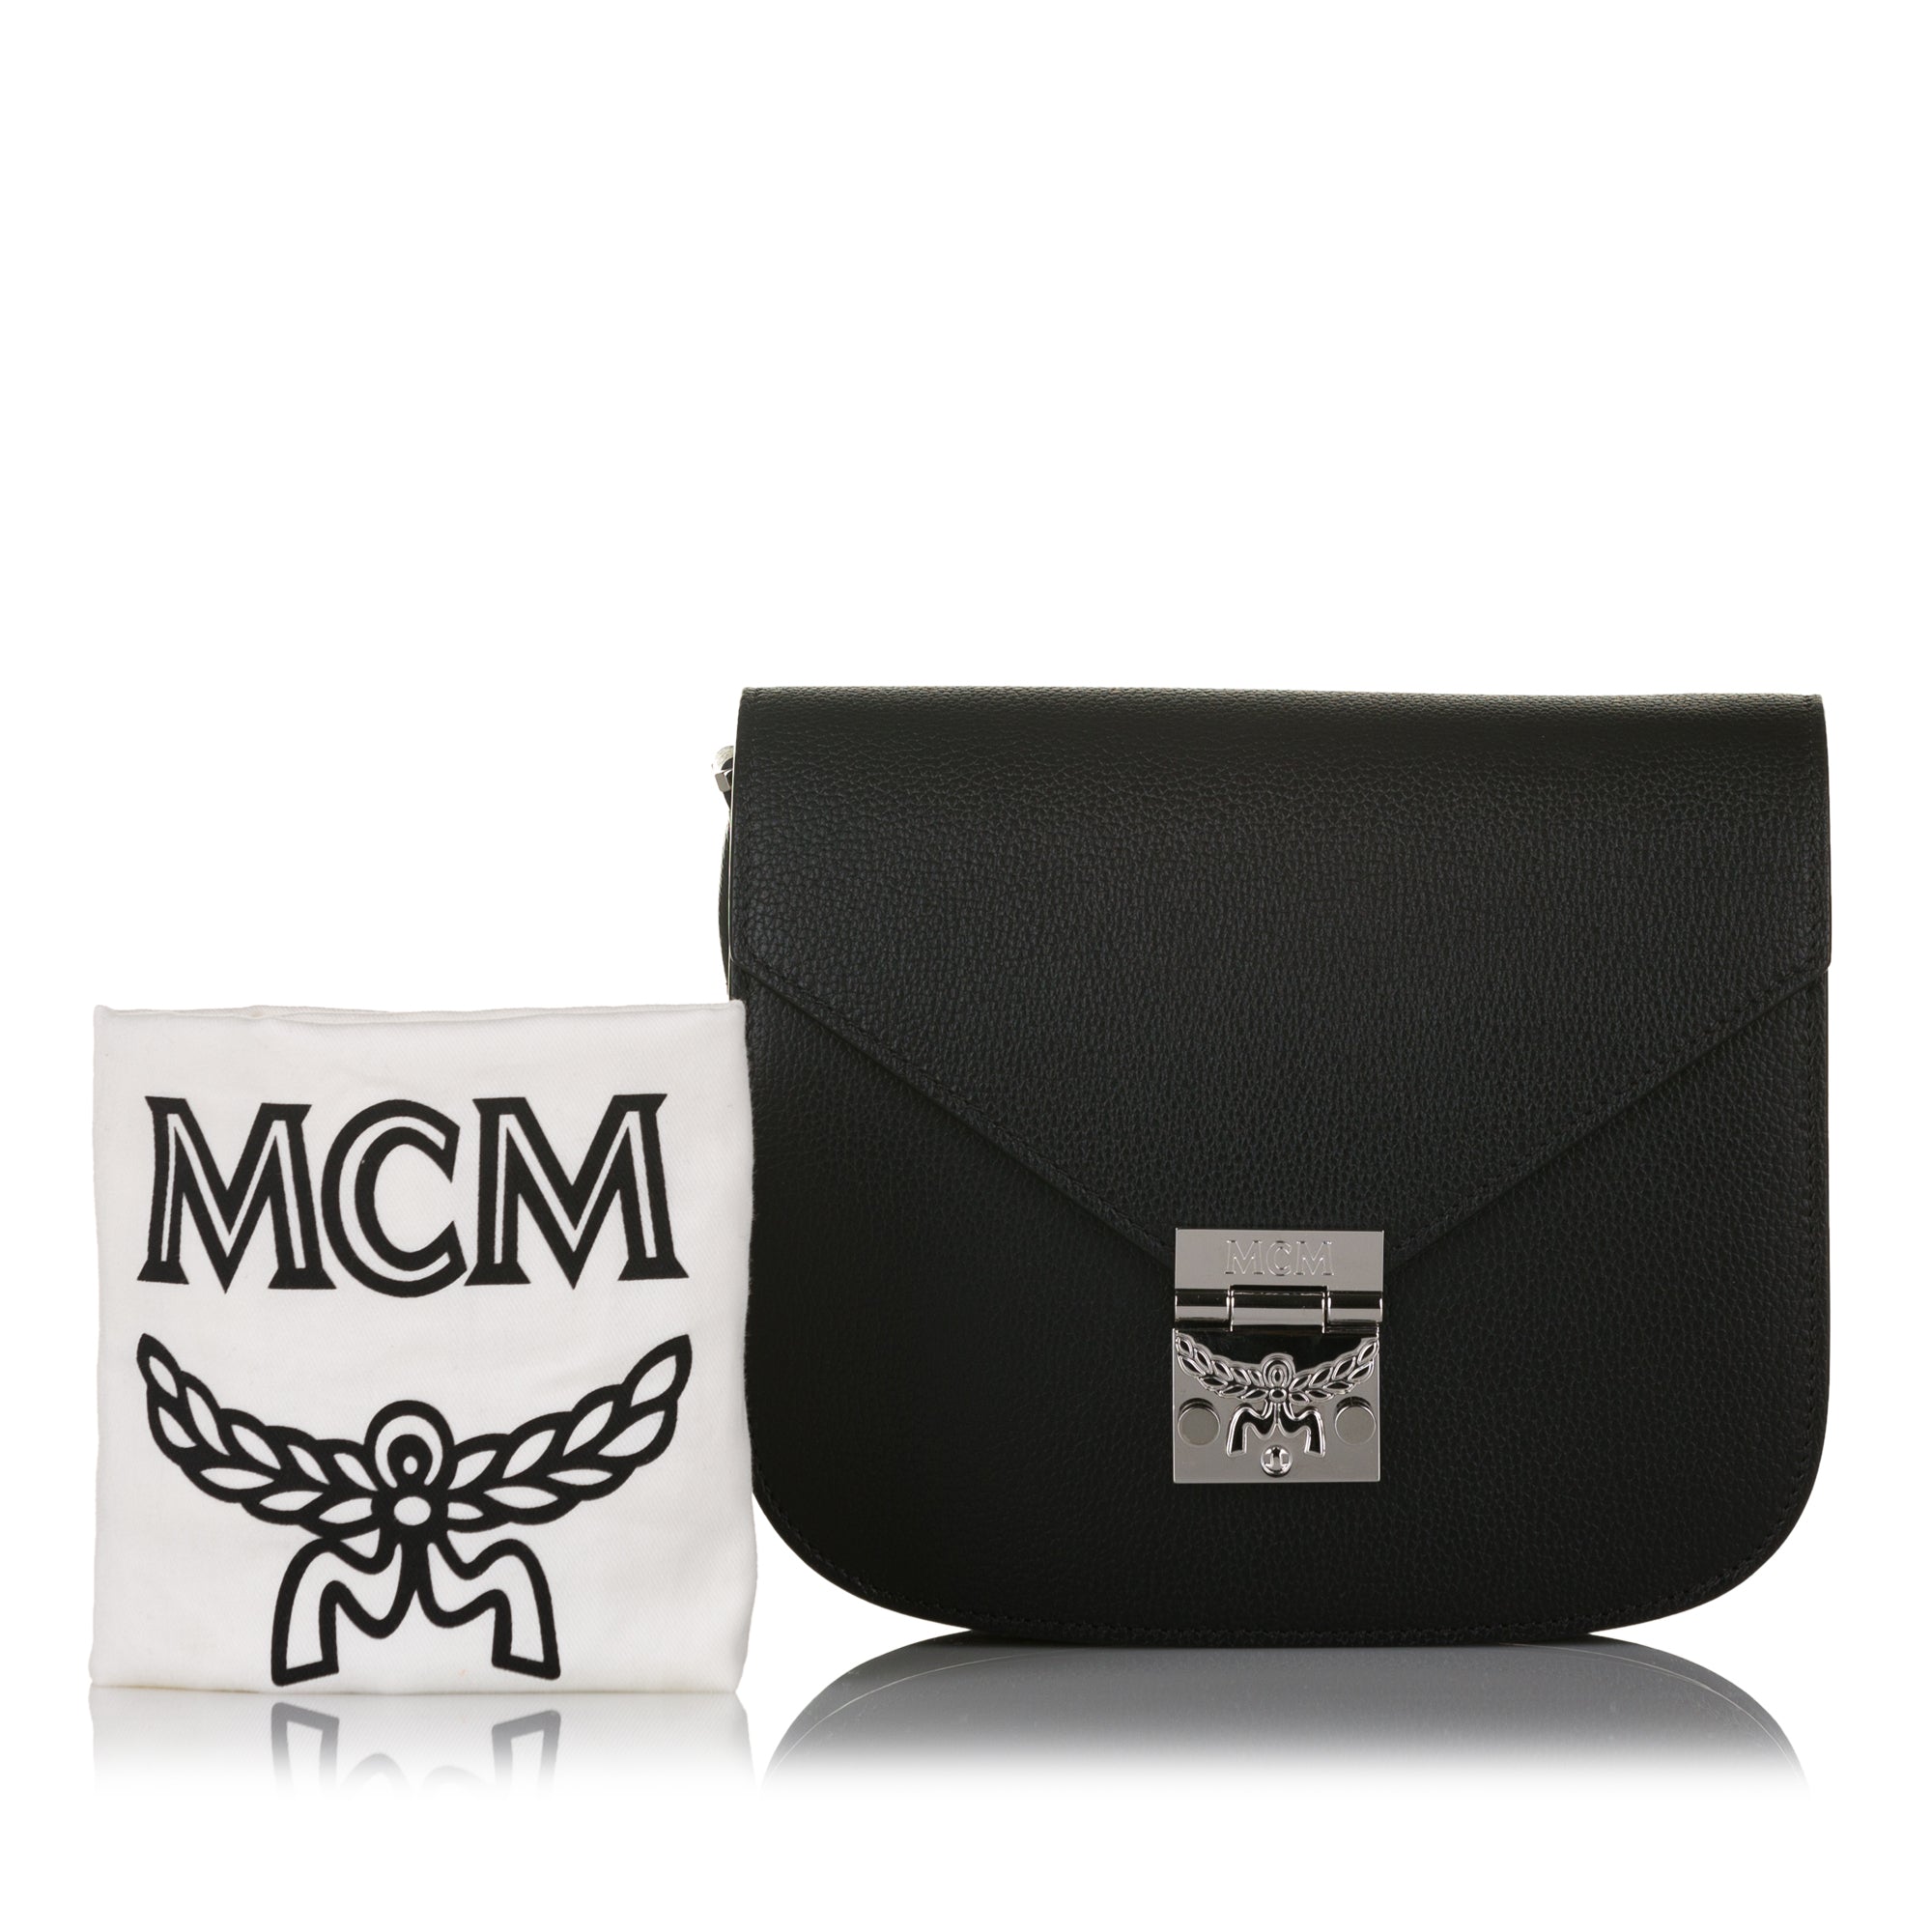 MCM Black Mini Patricia Leather Crossbody Bag, Best Price and Reviews